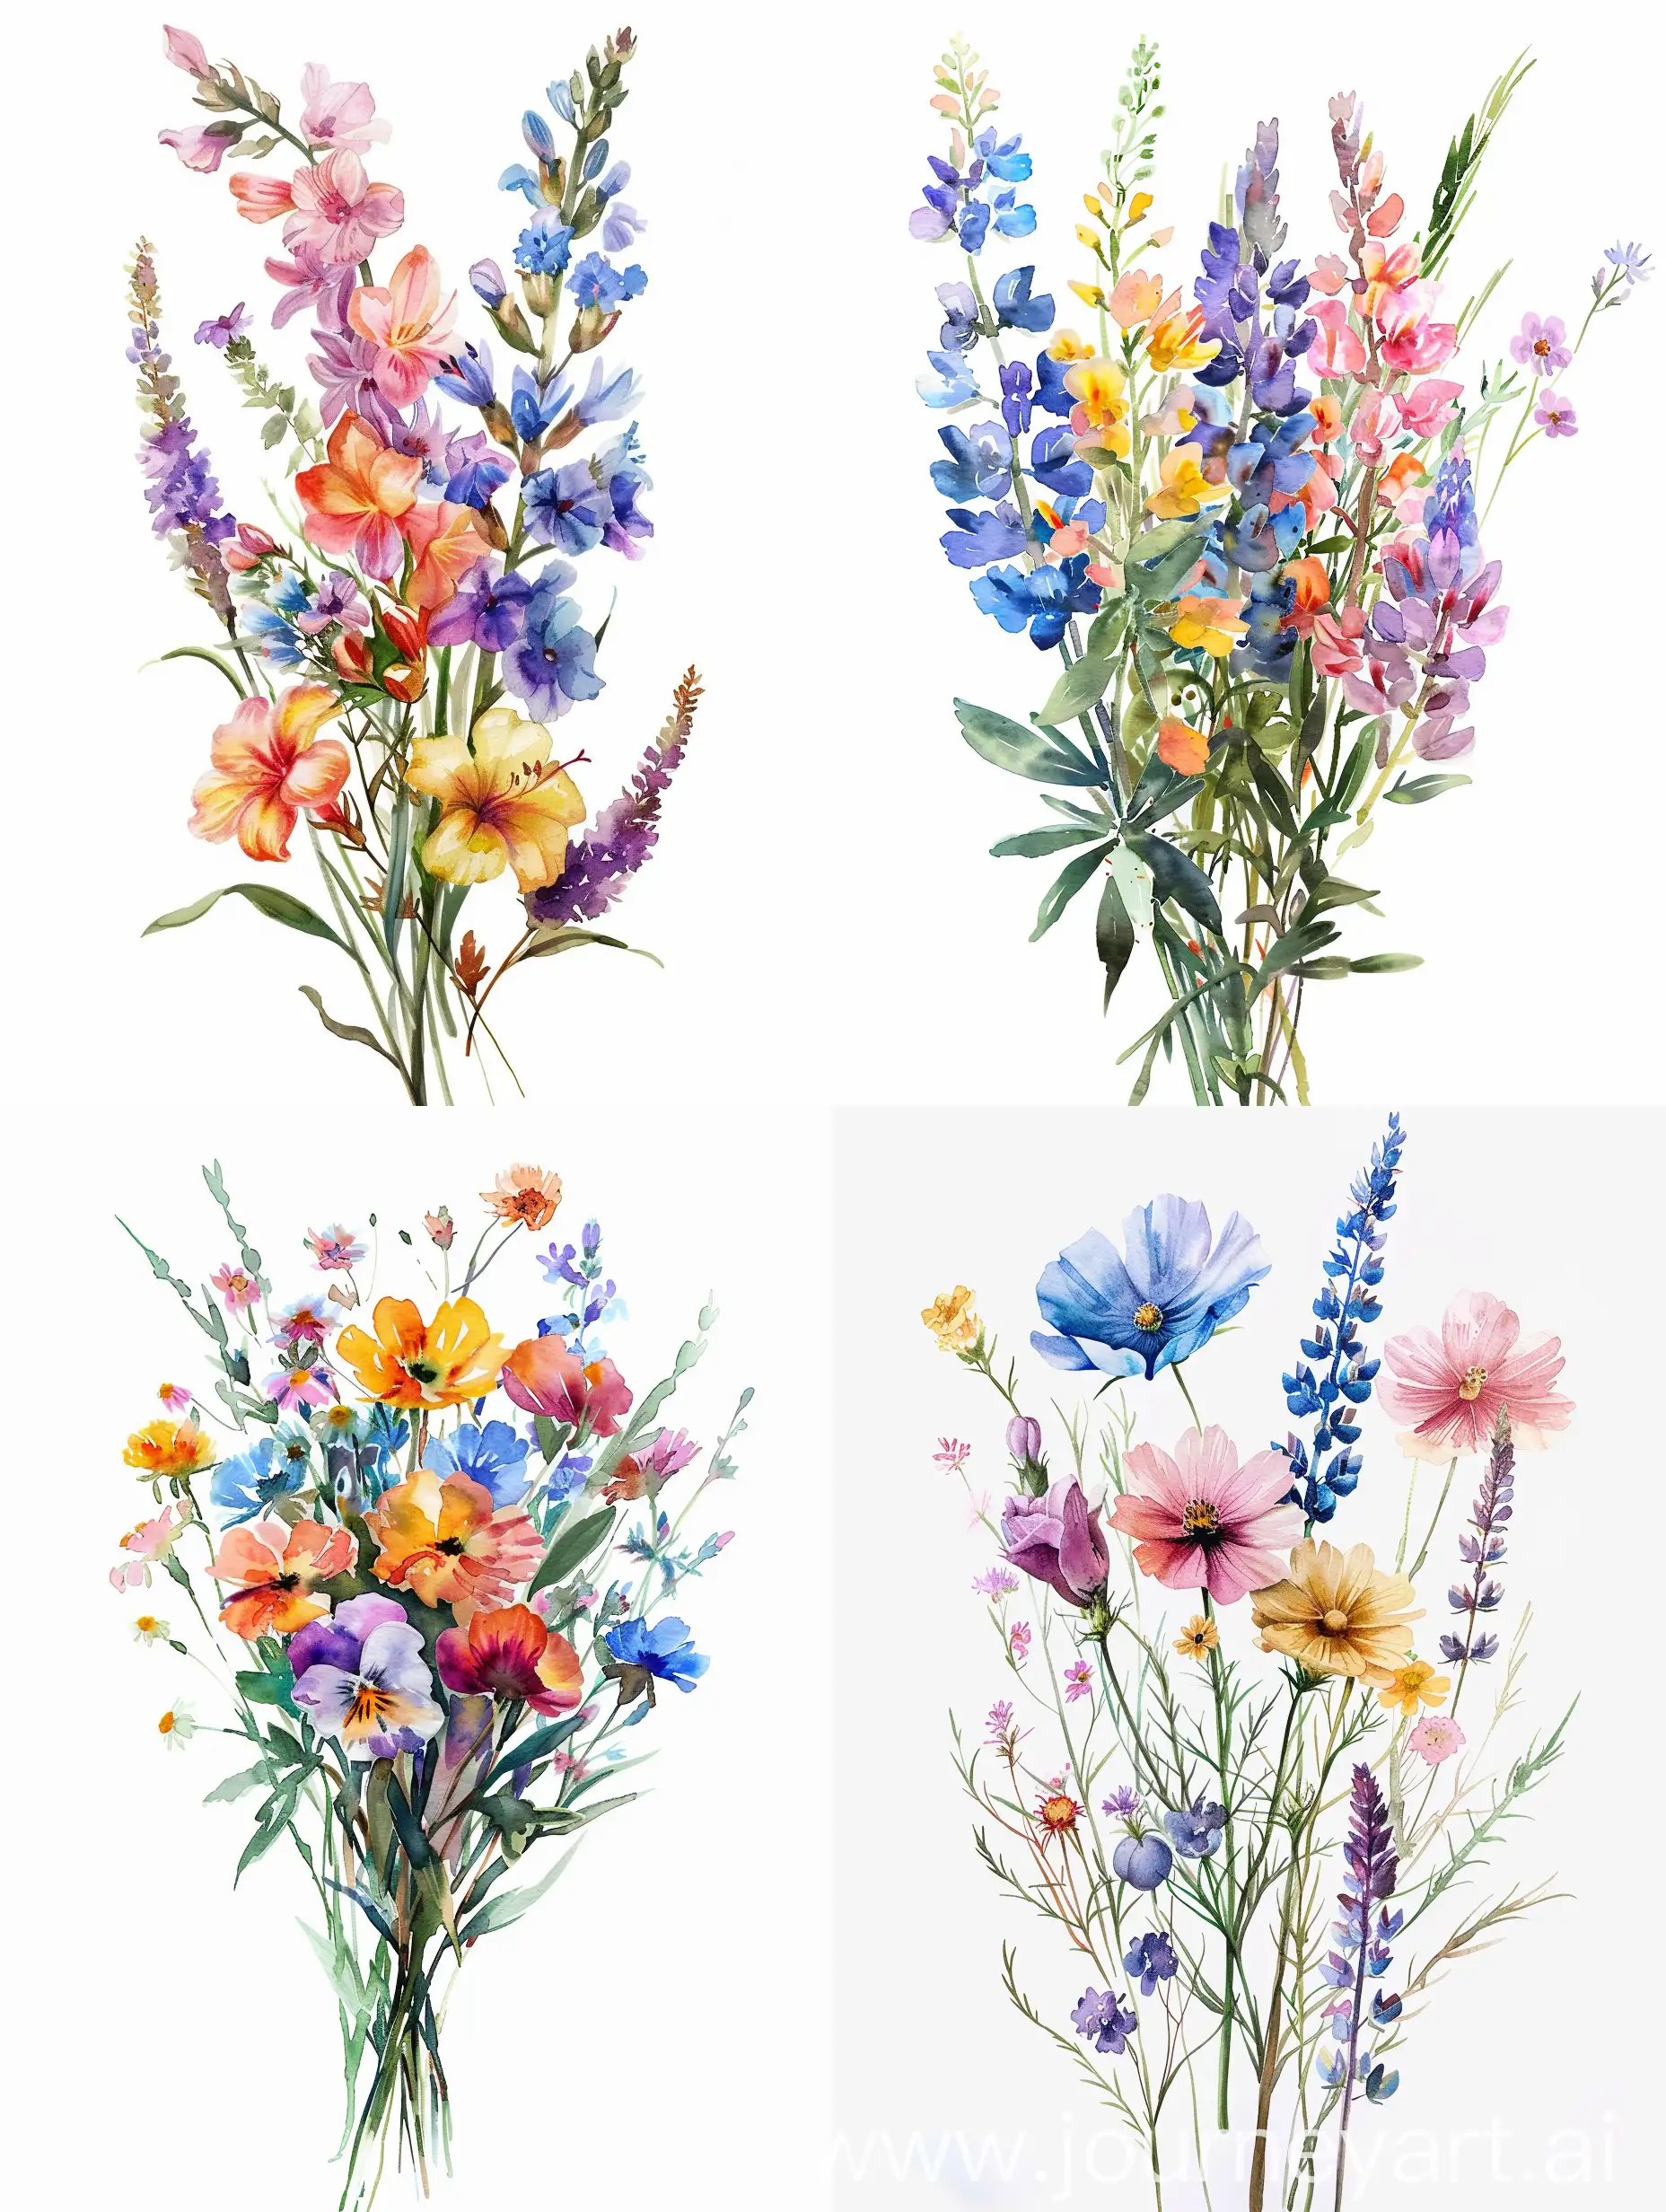 Isolated-Wildflower-Bouquet-in-Watercolor-Style-on-White-Background-with-Pastel-Tones